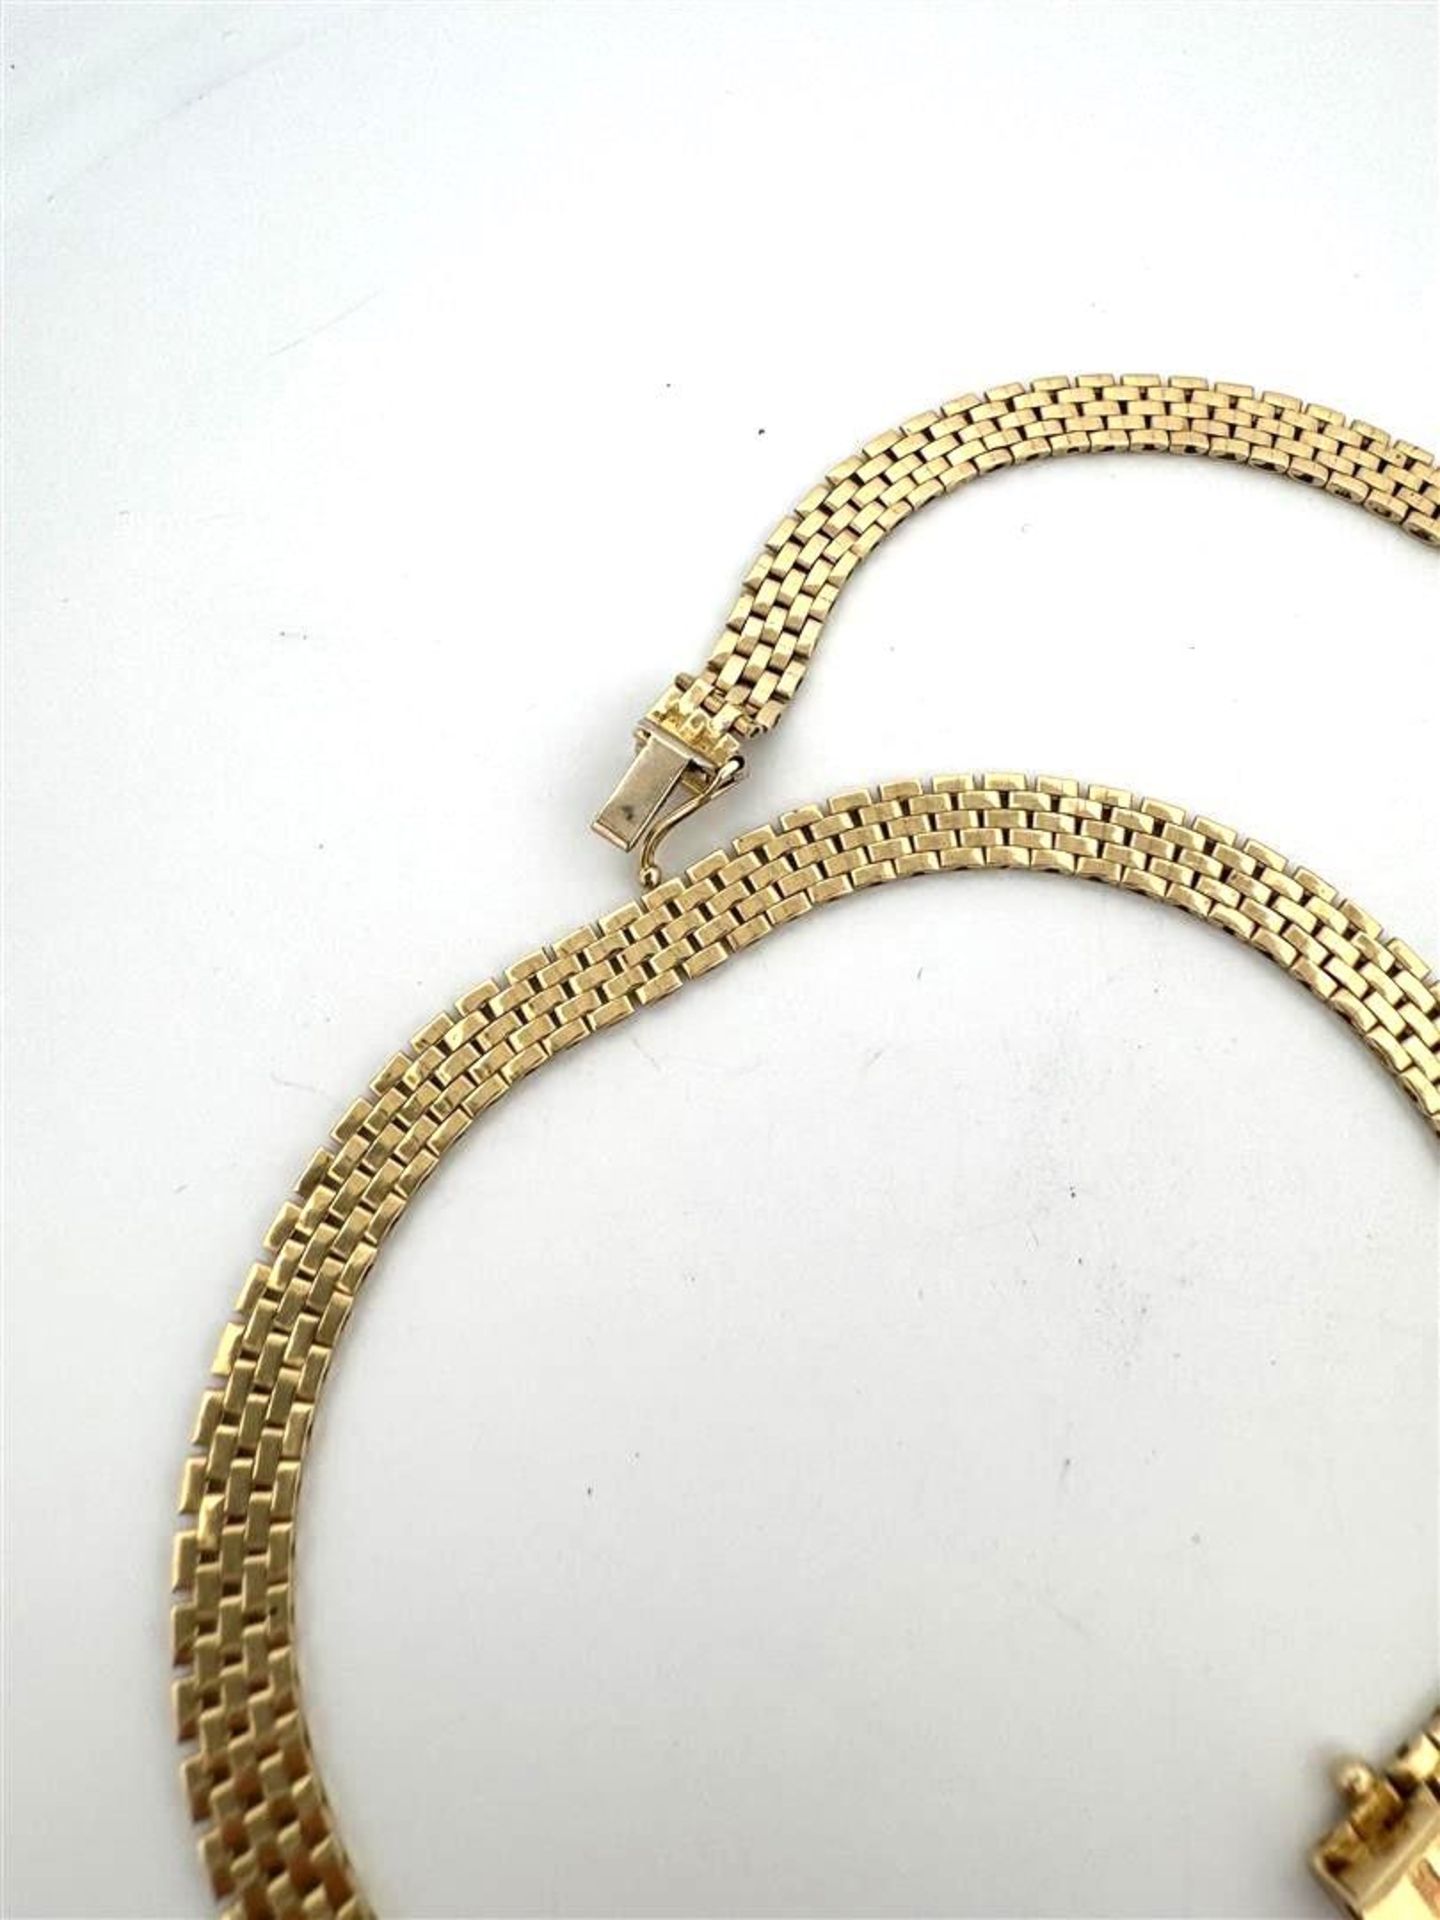 14kt yellow gold Rolex link necklace.
Length: 45 cm
Link width: 6.2 mm
Weight: 22.1 grams
Inspection - Image 2 of 3